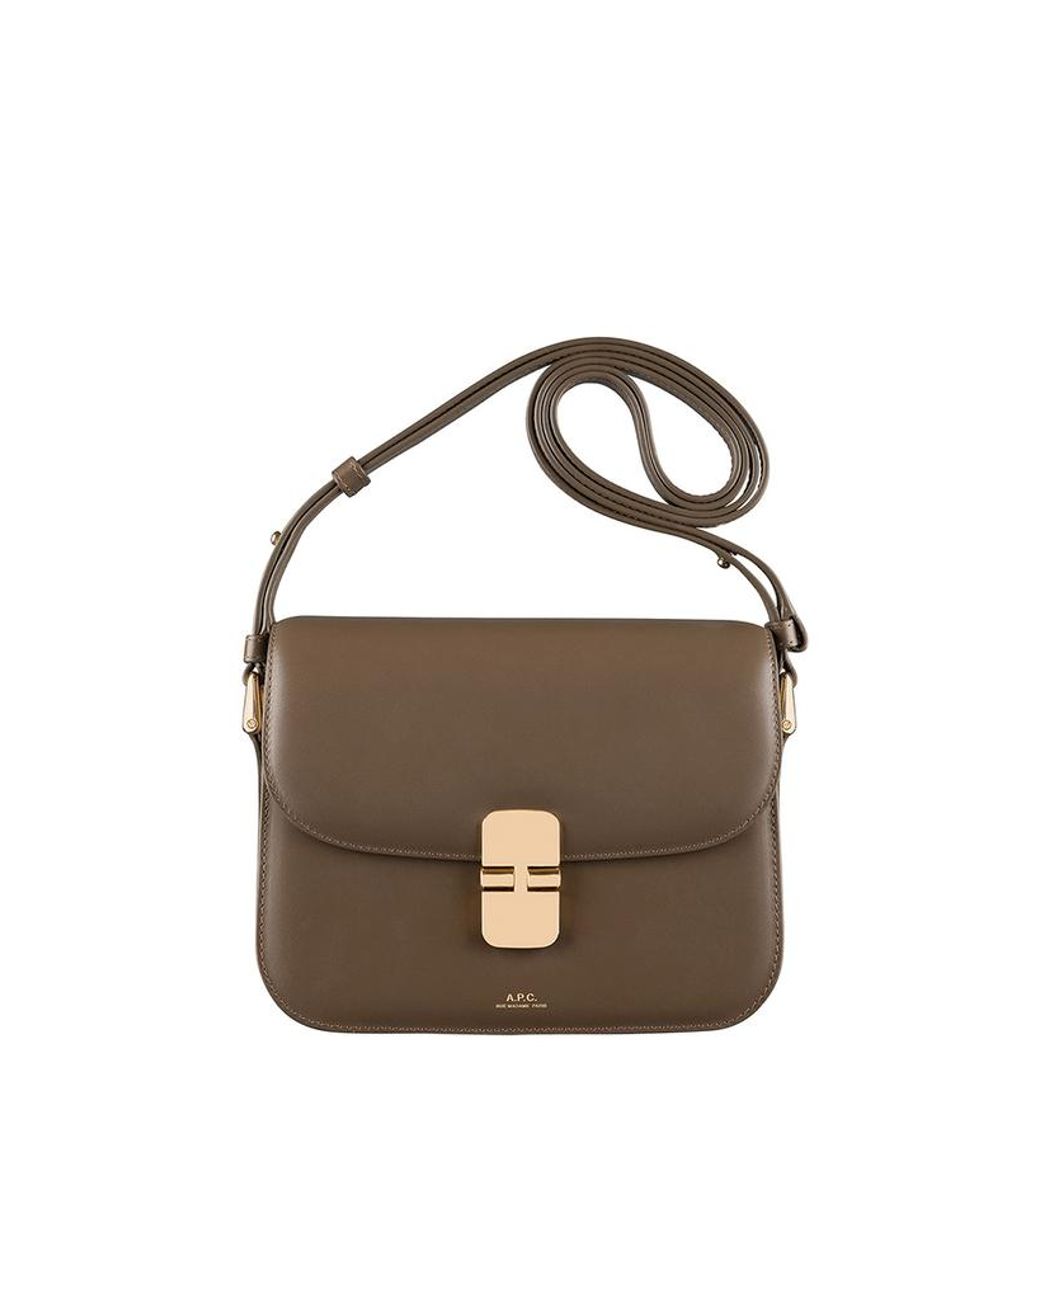 A.P.C. Sac Grace Taupe | Lyst